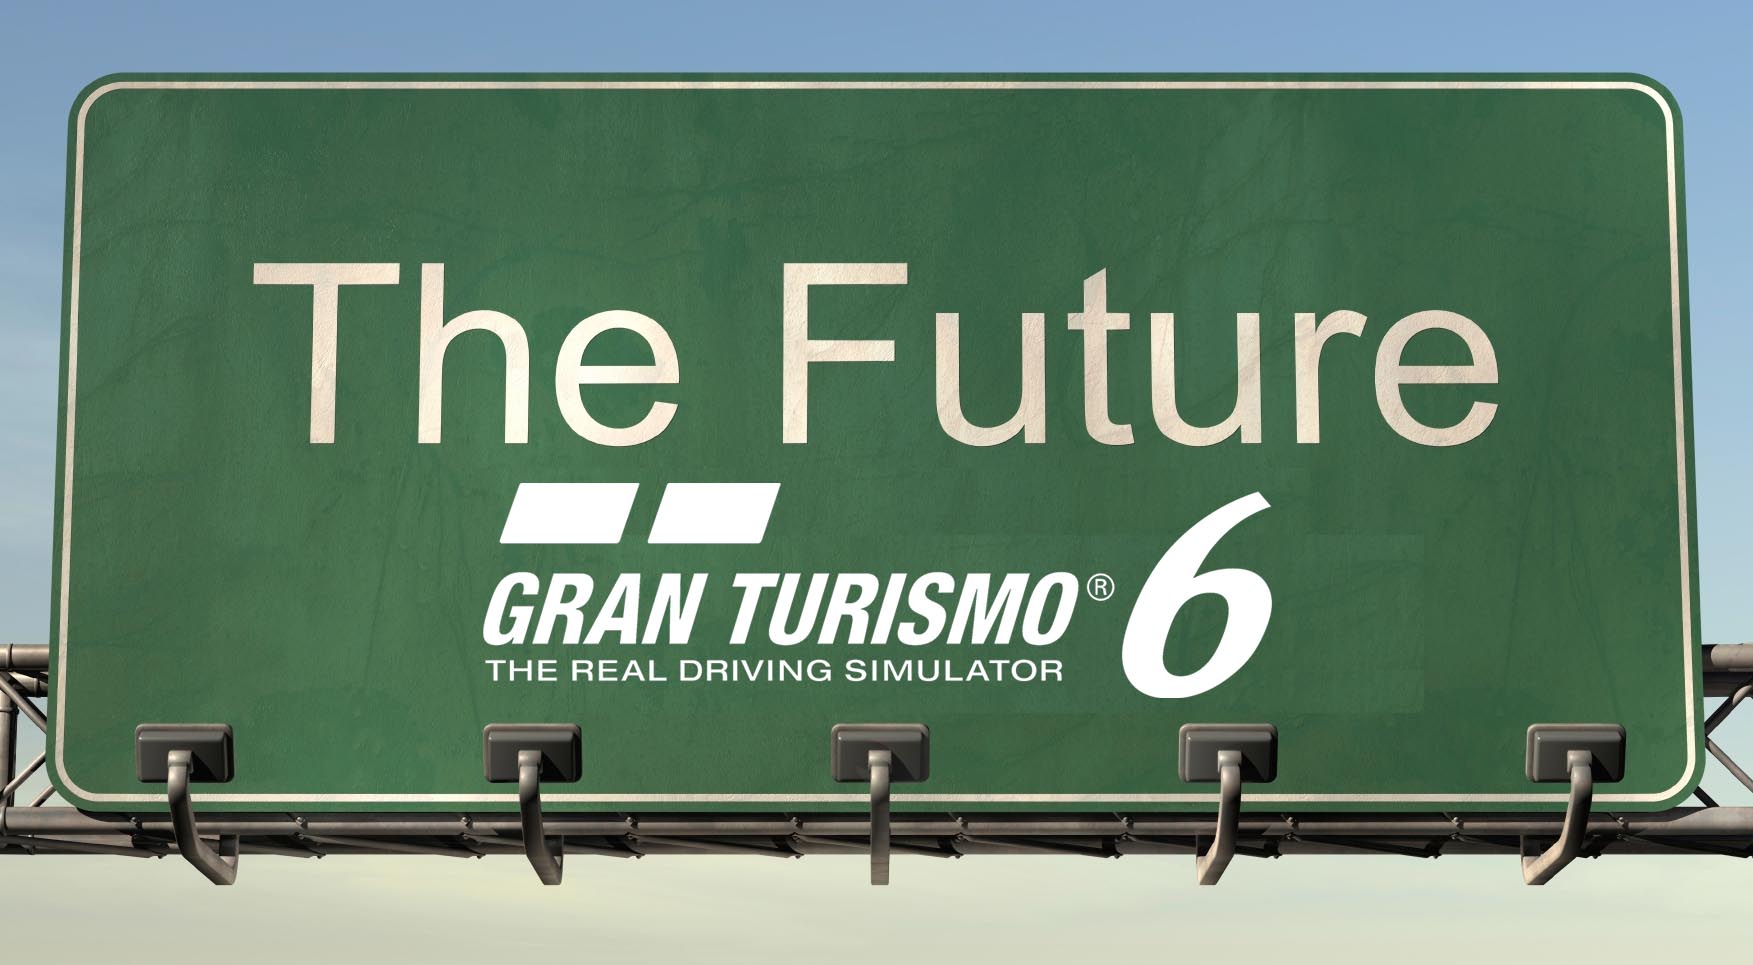 The future of GT6